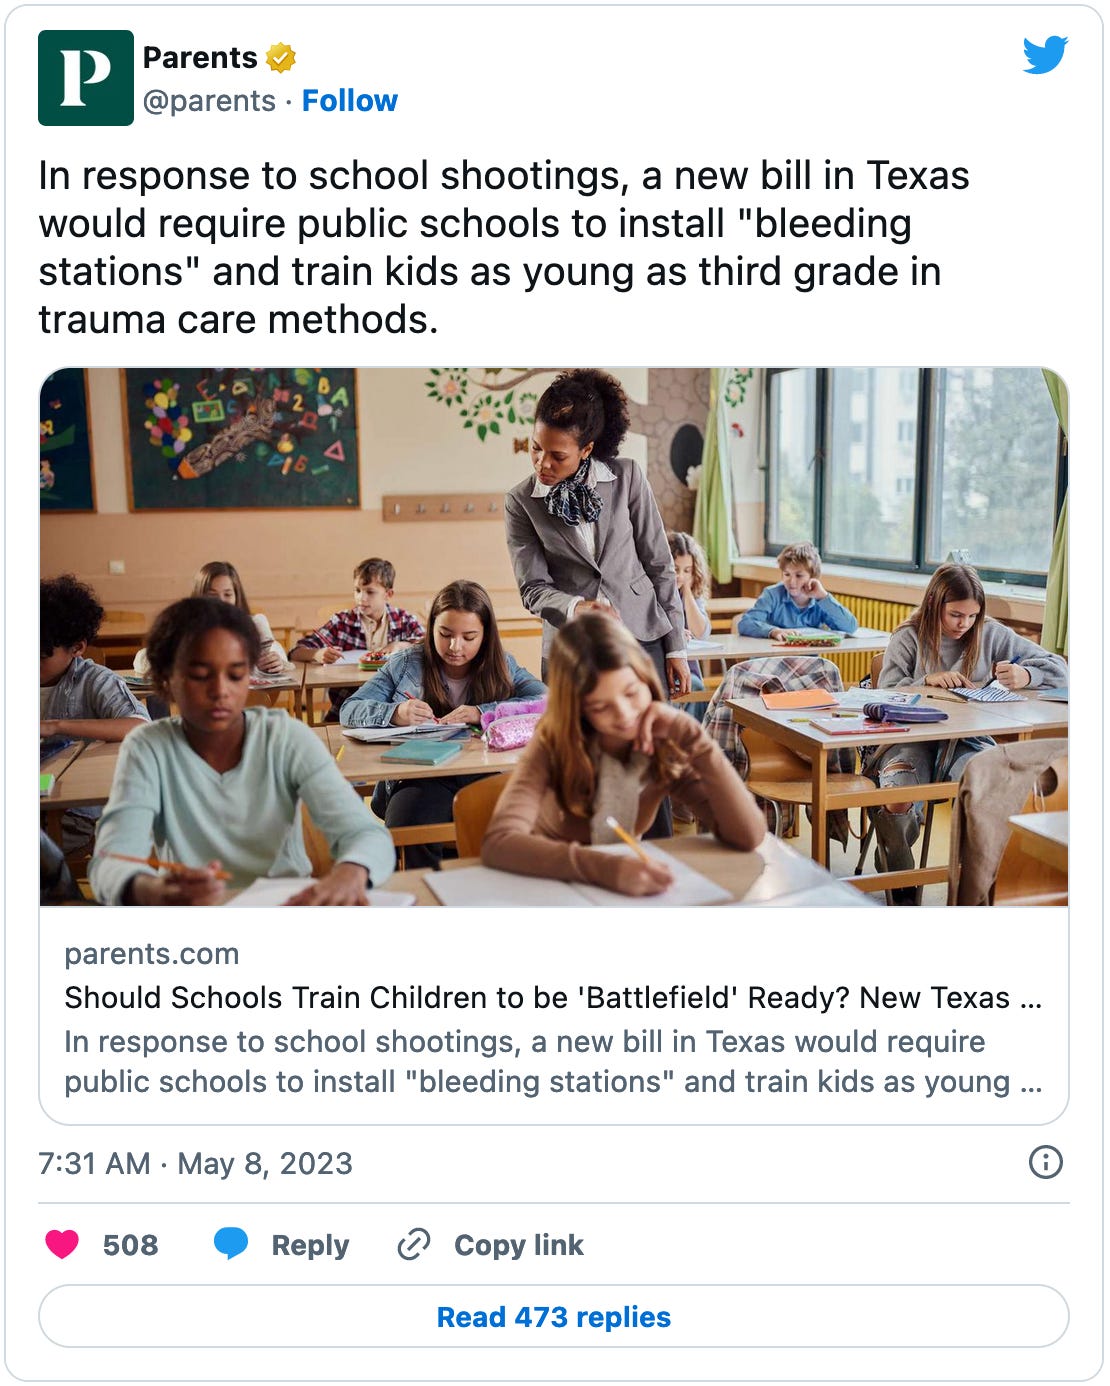 May 8, 2023 tweet from Parents.com reading, "In response to school shootings, a new bill in Texas would require public schools to install "bleeding stations" and train kids as young as third grade in trauma care methods."